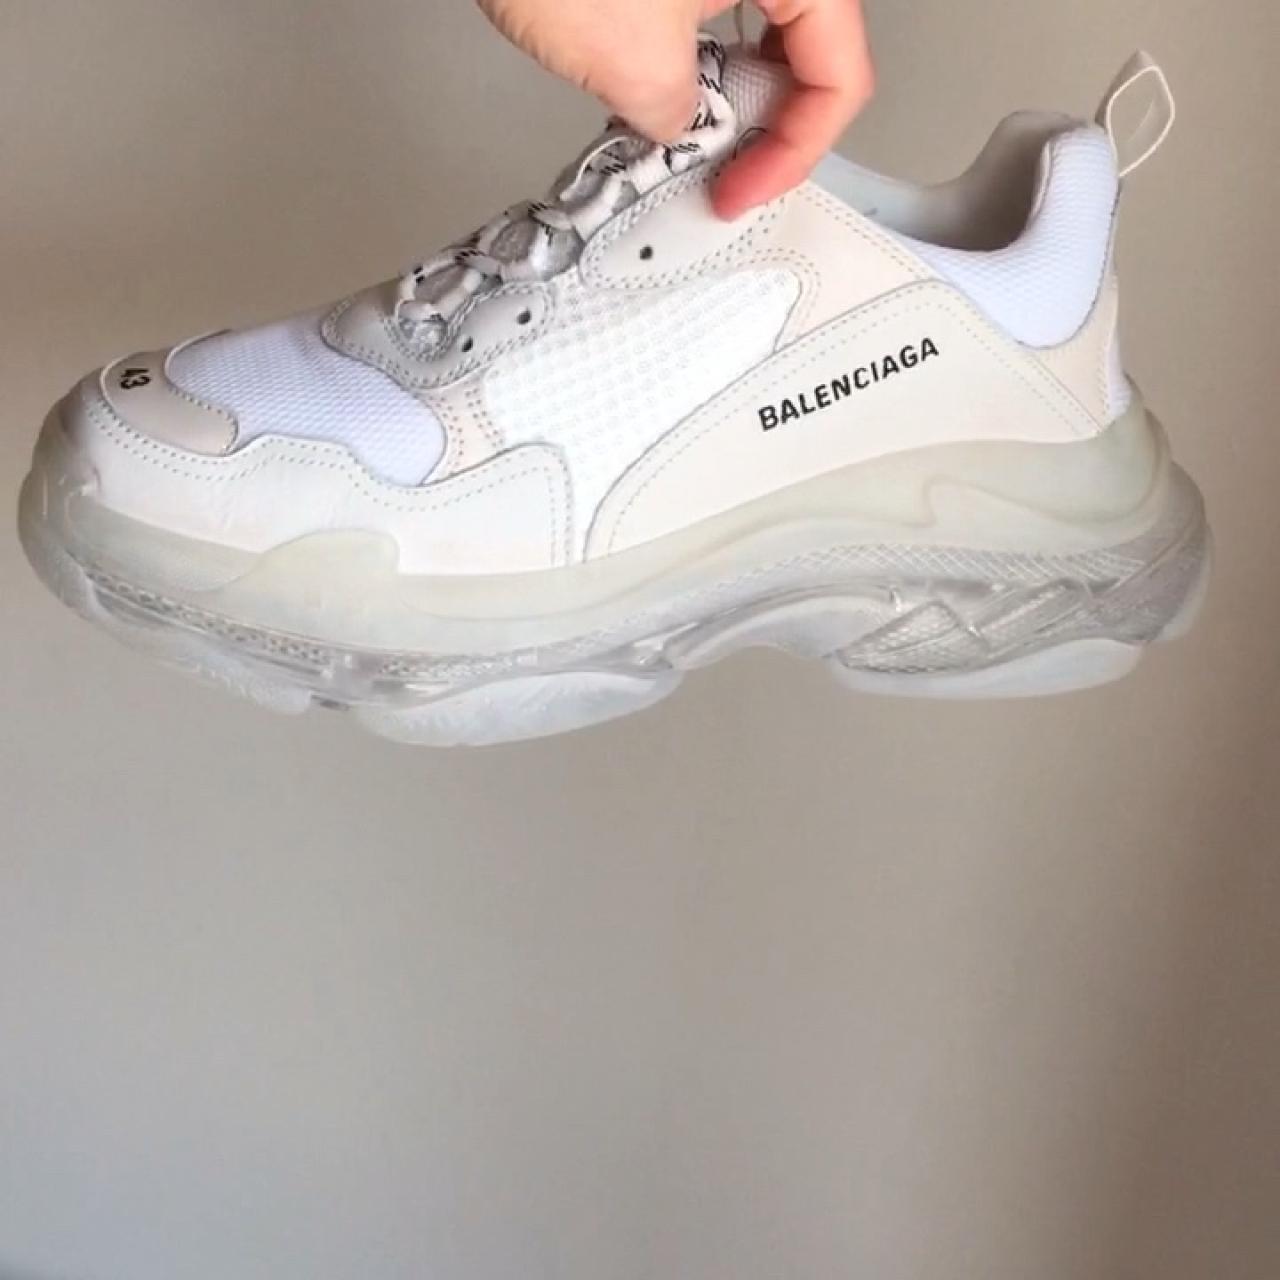 Balenciaga Triple S Sneakers Outfit in 2019 Sneakers